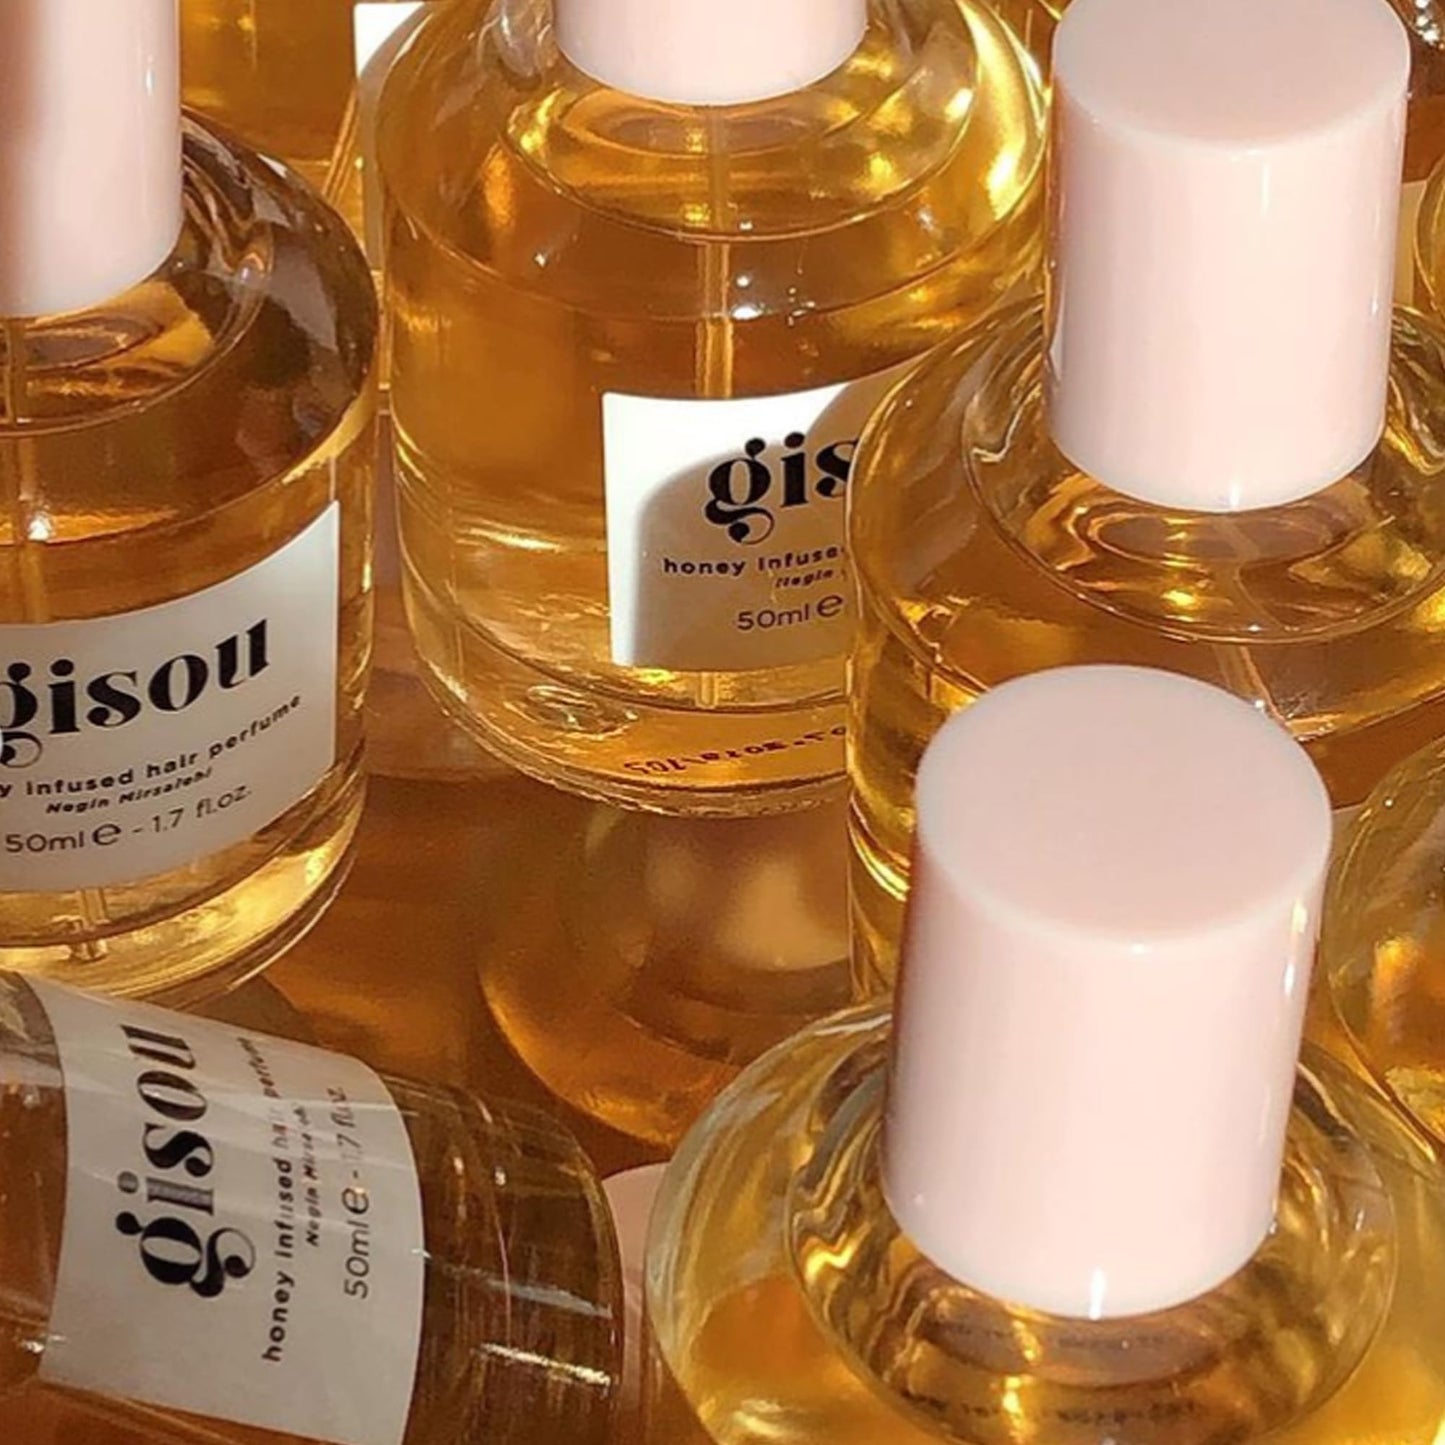 Gisou Honey Infused Hair Perfume, A Travel-Friendly Fragrance with Sweet Notes of Honey Blended into Spring Florals (1.7 fl oz)